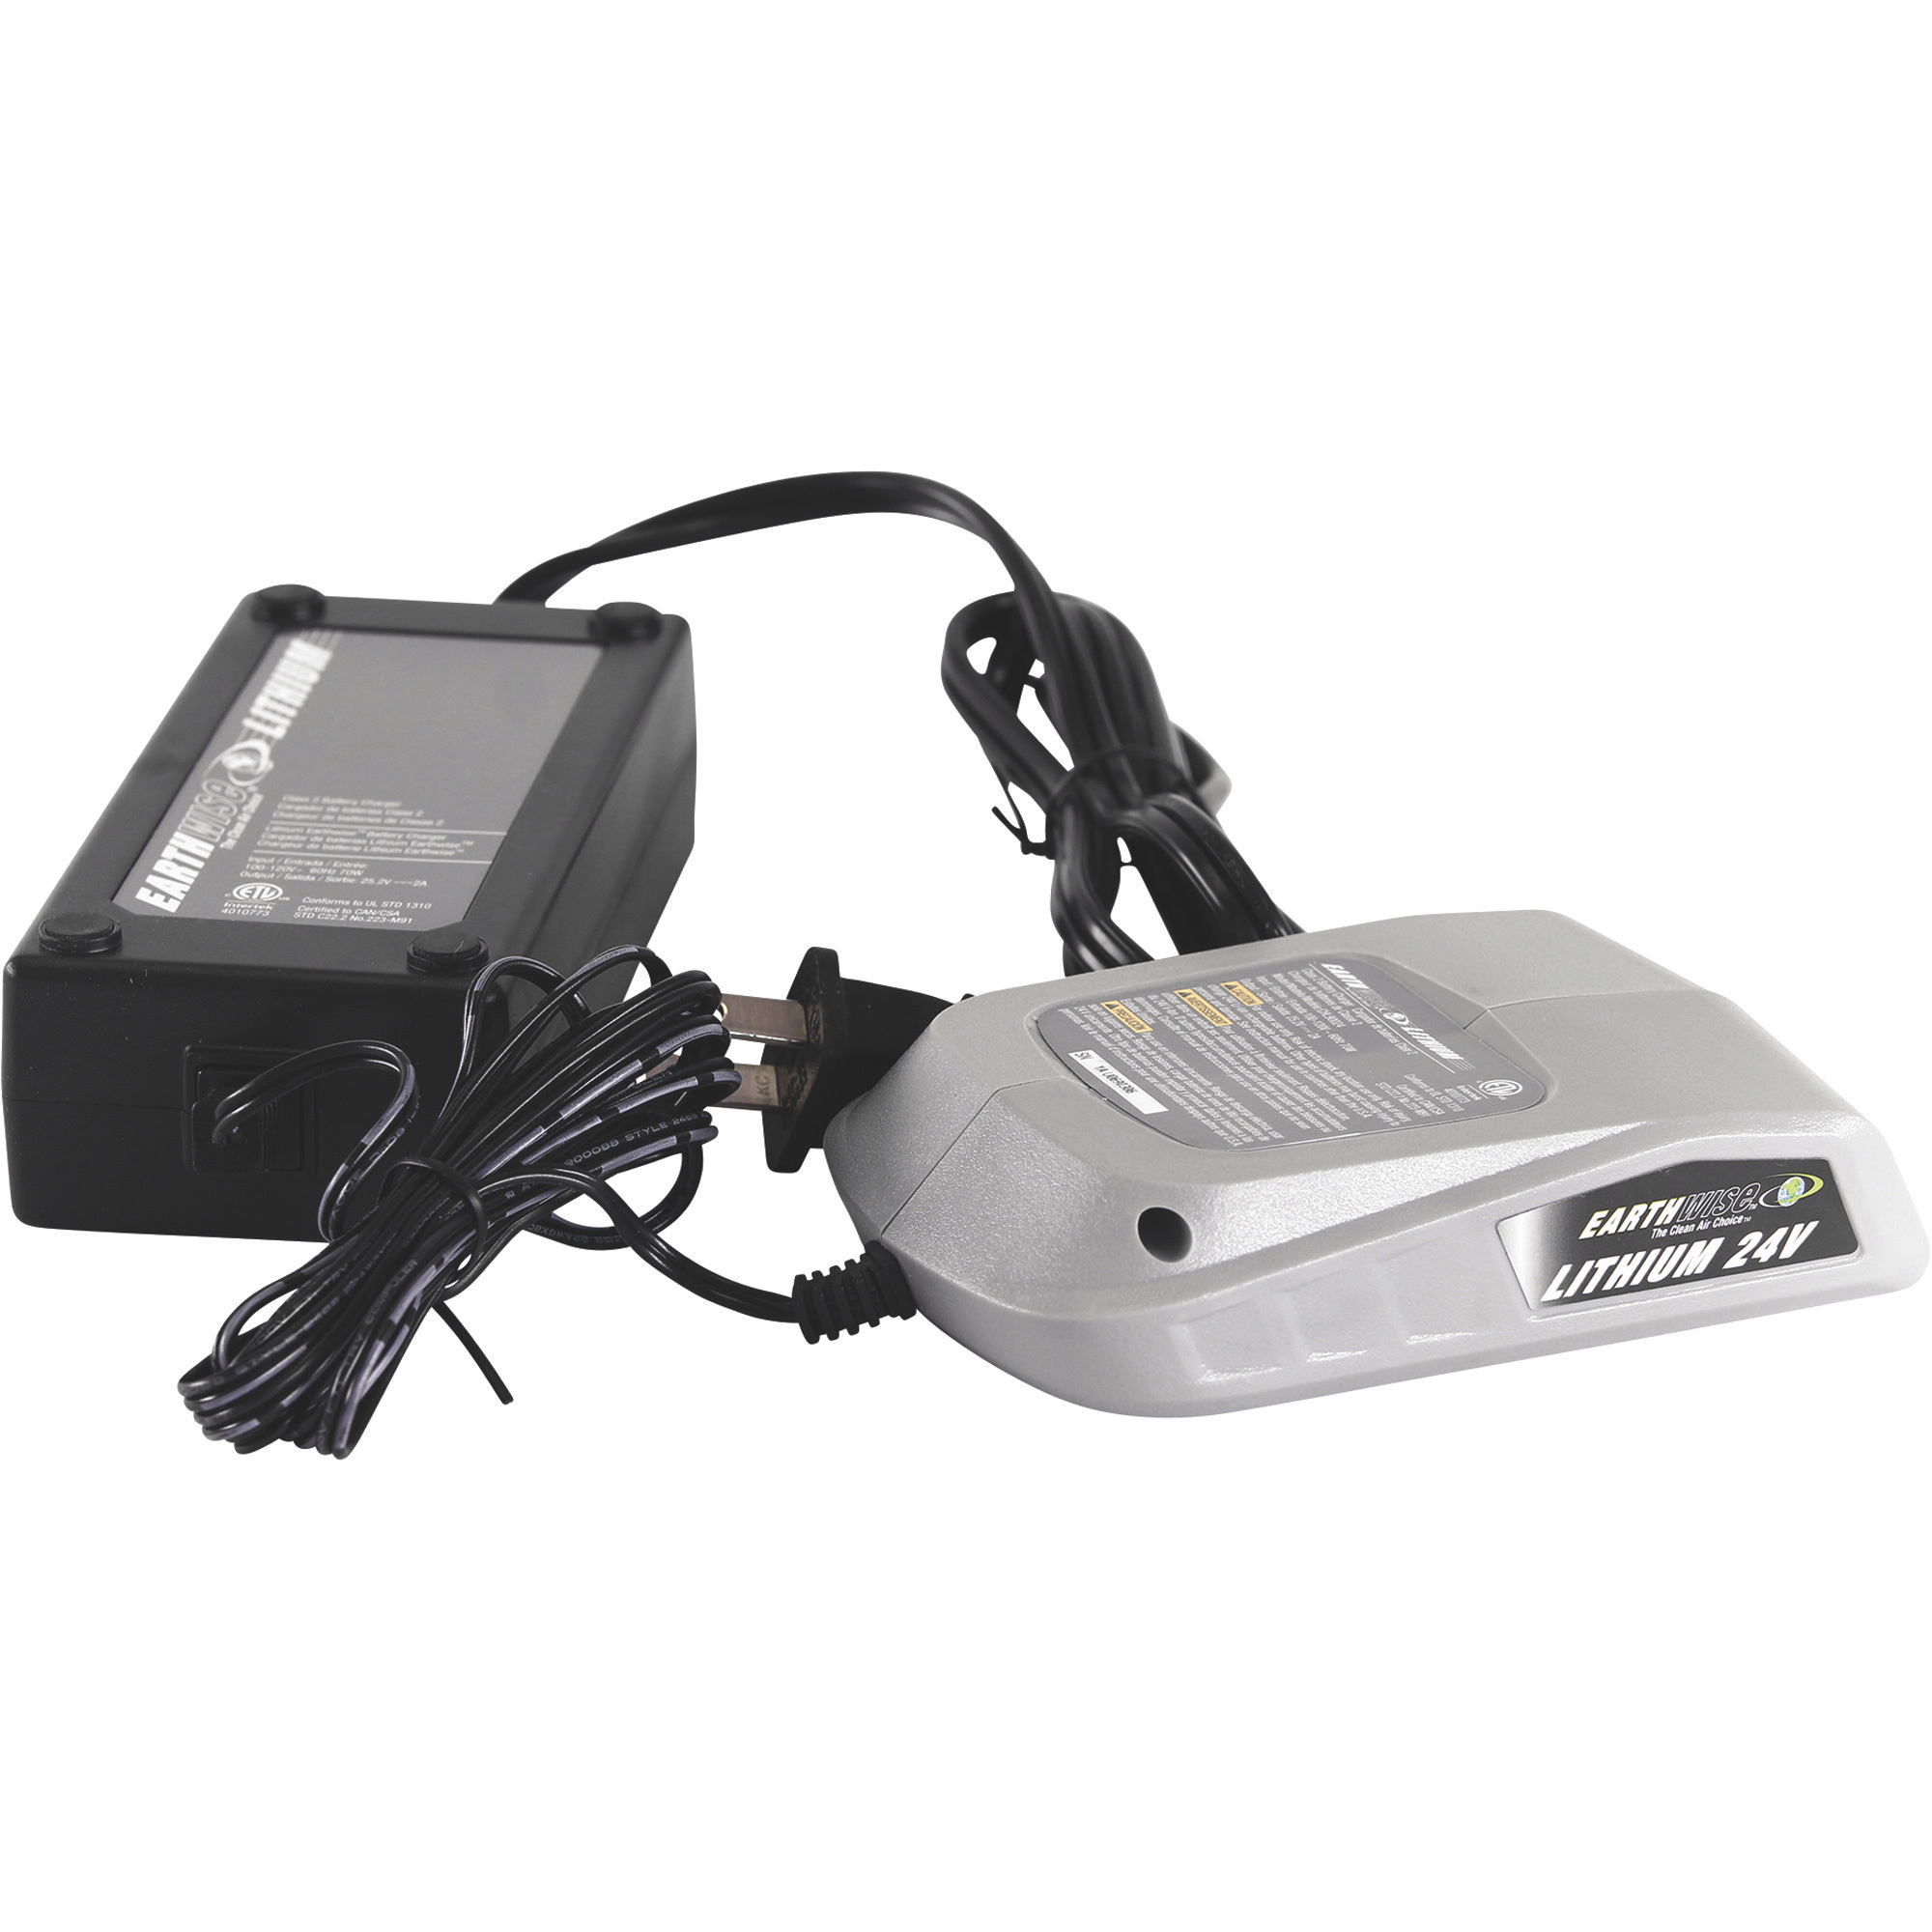 Lithium-Ion Battery Charger — 24 Volt, Model - Earthwise CHL90024